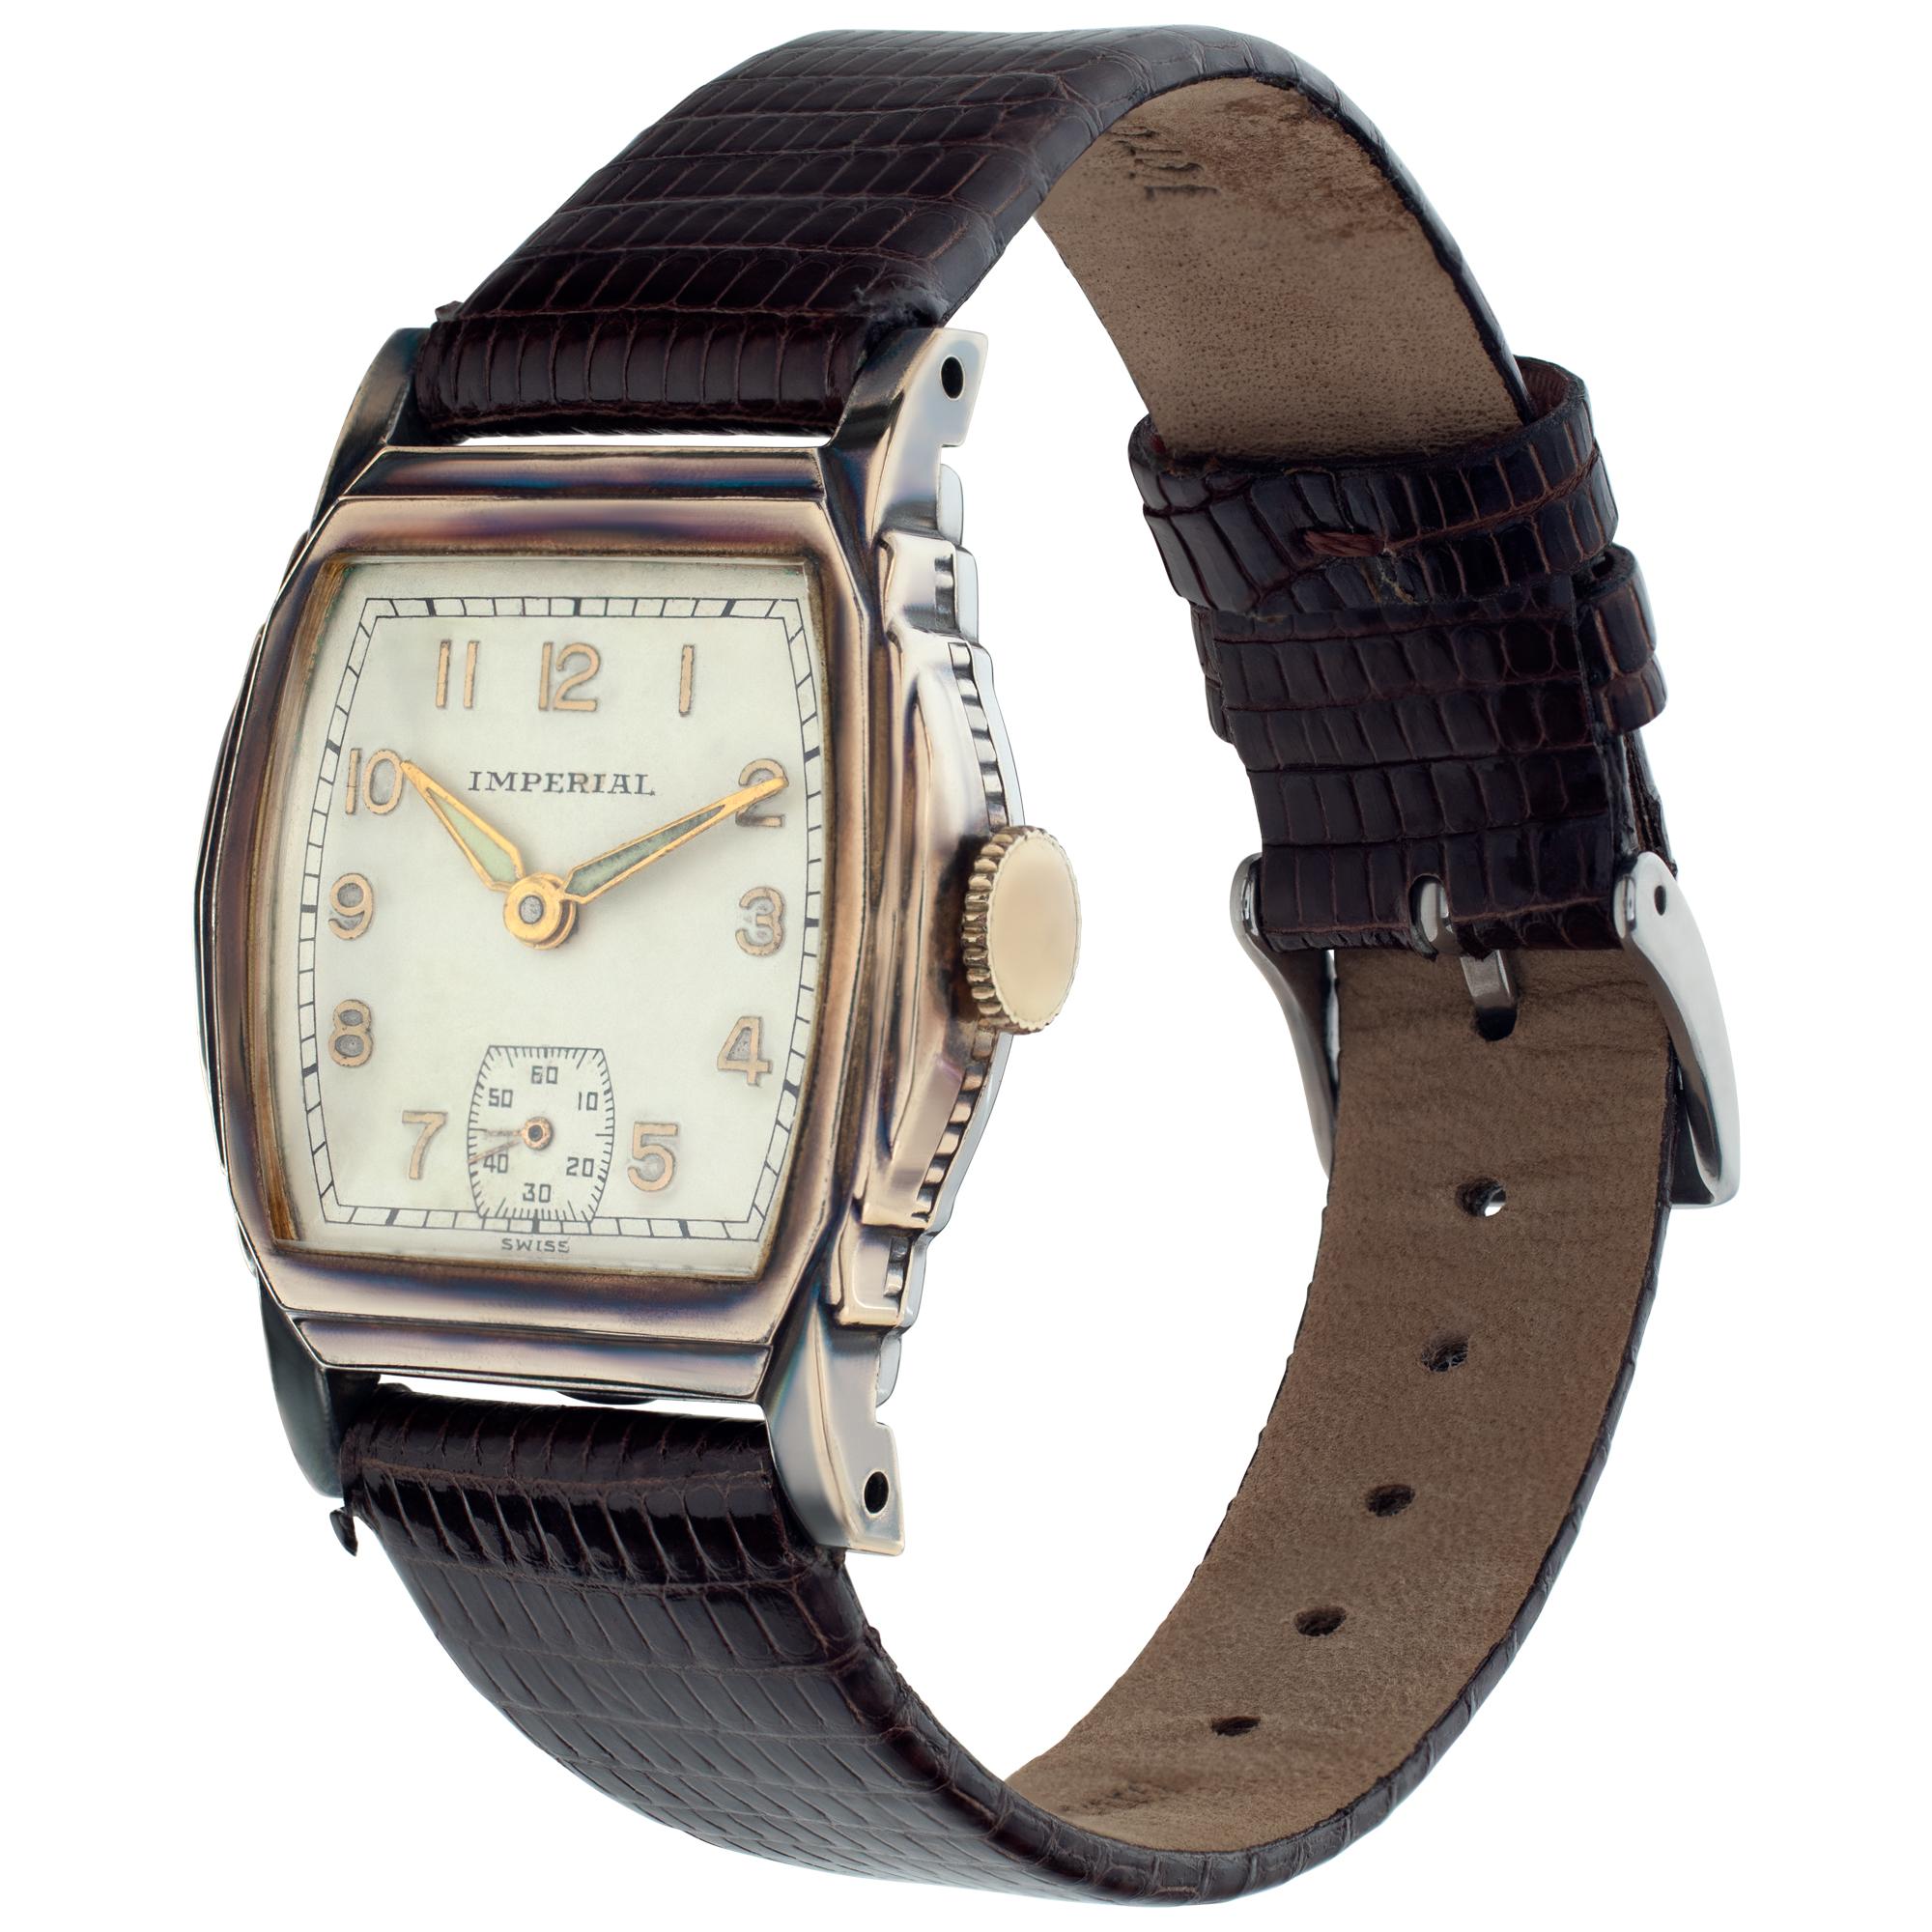 Unisex Imperial gold fill case, gold fill bezel, leather leather band with two piece clasp. Manual wind 7 jewel movement wit sub-seconds. Certified pre-owned. Circa 1940 Fine Pre-owned Imperial Watch. Certified preowned Vintage Imperial Classic